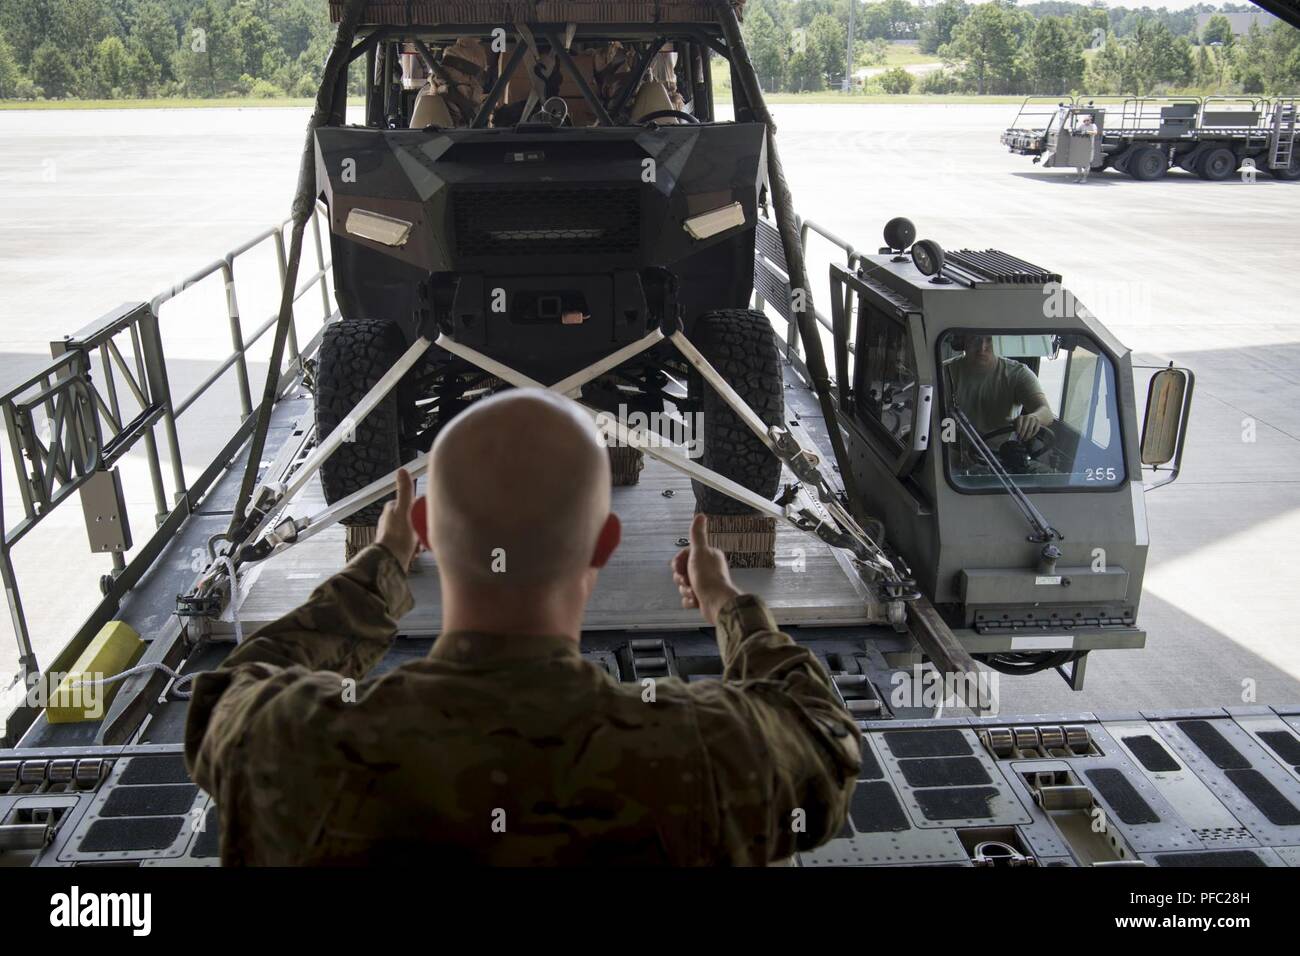 U.S. Air Force Tech Sgt. Eric Morris, loadmaster, 16th Airlift Squadron, Joint Base Charleston, S.C., loads Dagor Ultra-light Combat Vehicles onto C-17 Globemaster III's at Pope Army Air Field, N.C., during Exercise Swift Response 18 (SR18) June 7, 2018. SR18 is one of the premier military crisis response training events for multinational airborne forces in the world that demonstrates the ability of America's Global Response Force to work hand-in-hand with joint and total force partners. Stock Photo